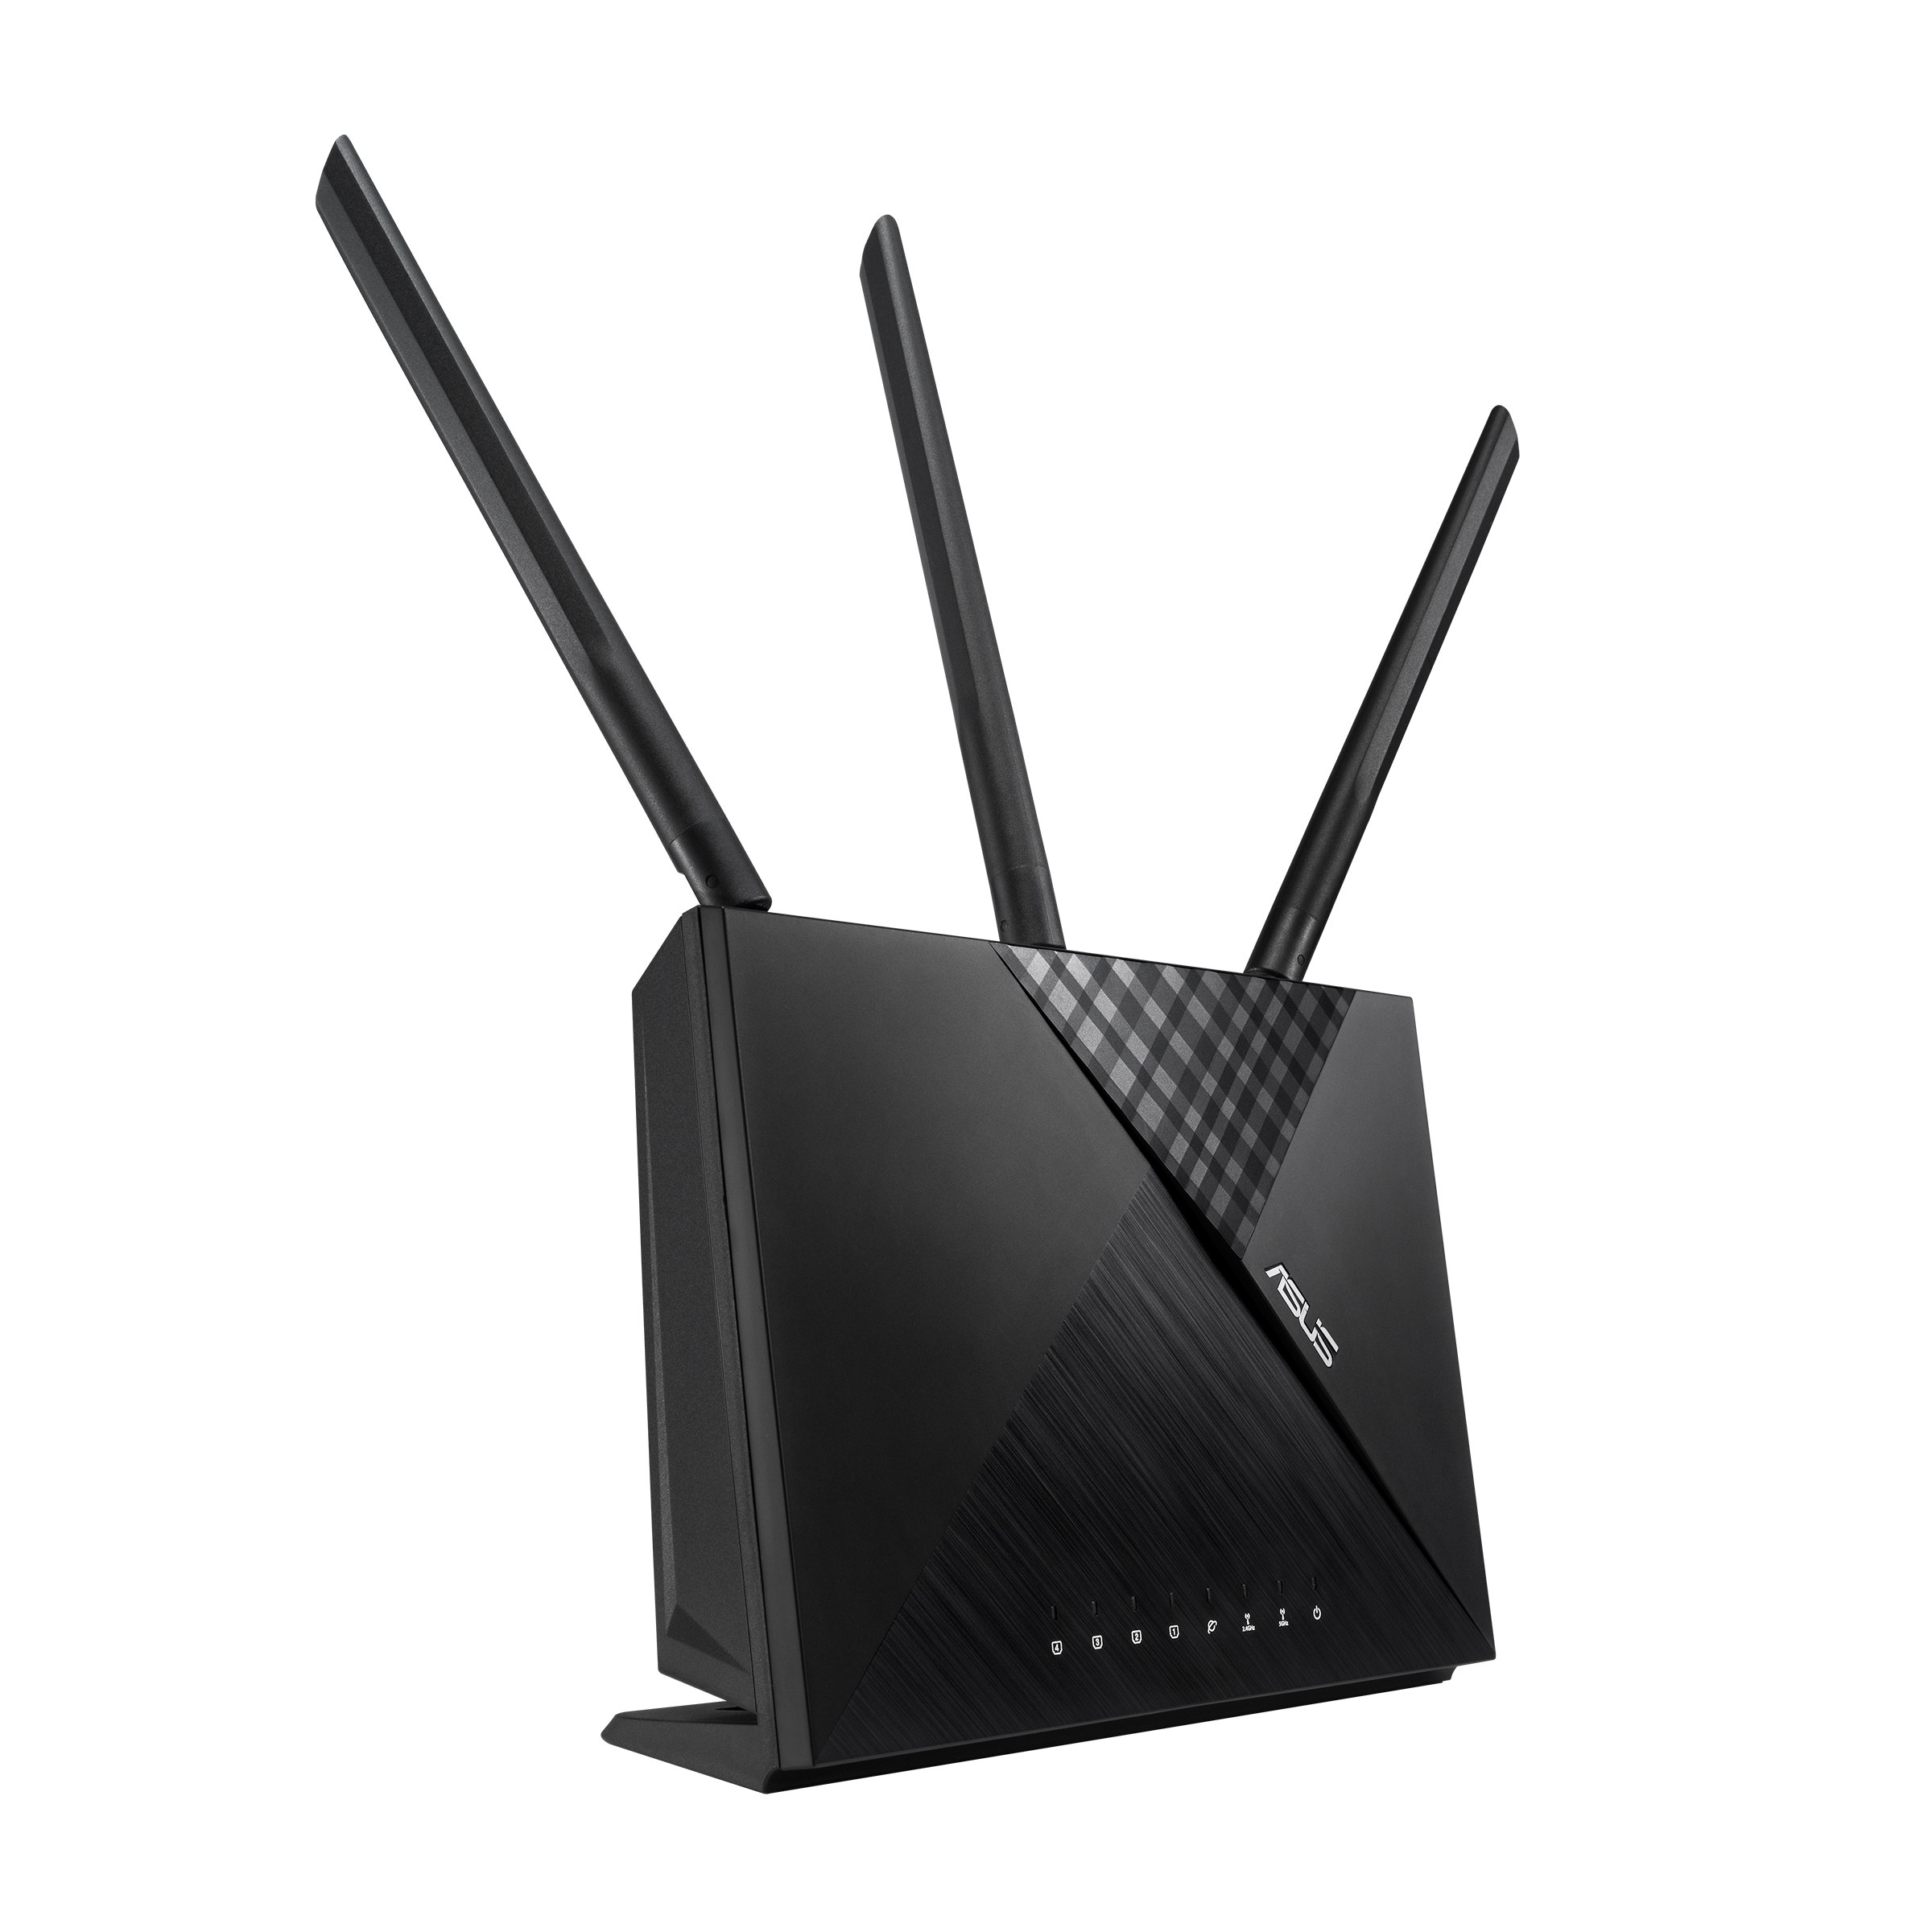 ASUS AC1900 WiFi Router (RT-AC67P) - Dual Band Wireless Internet Router,  Easy Setup, VPN, Parental Control, AiRadar Beamforming Technology extends